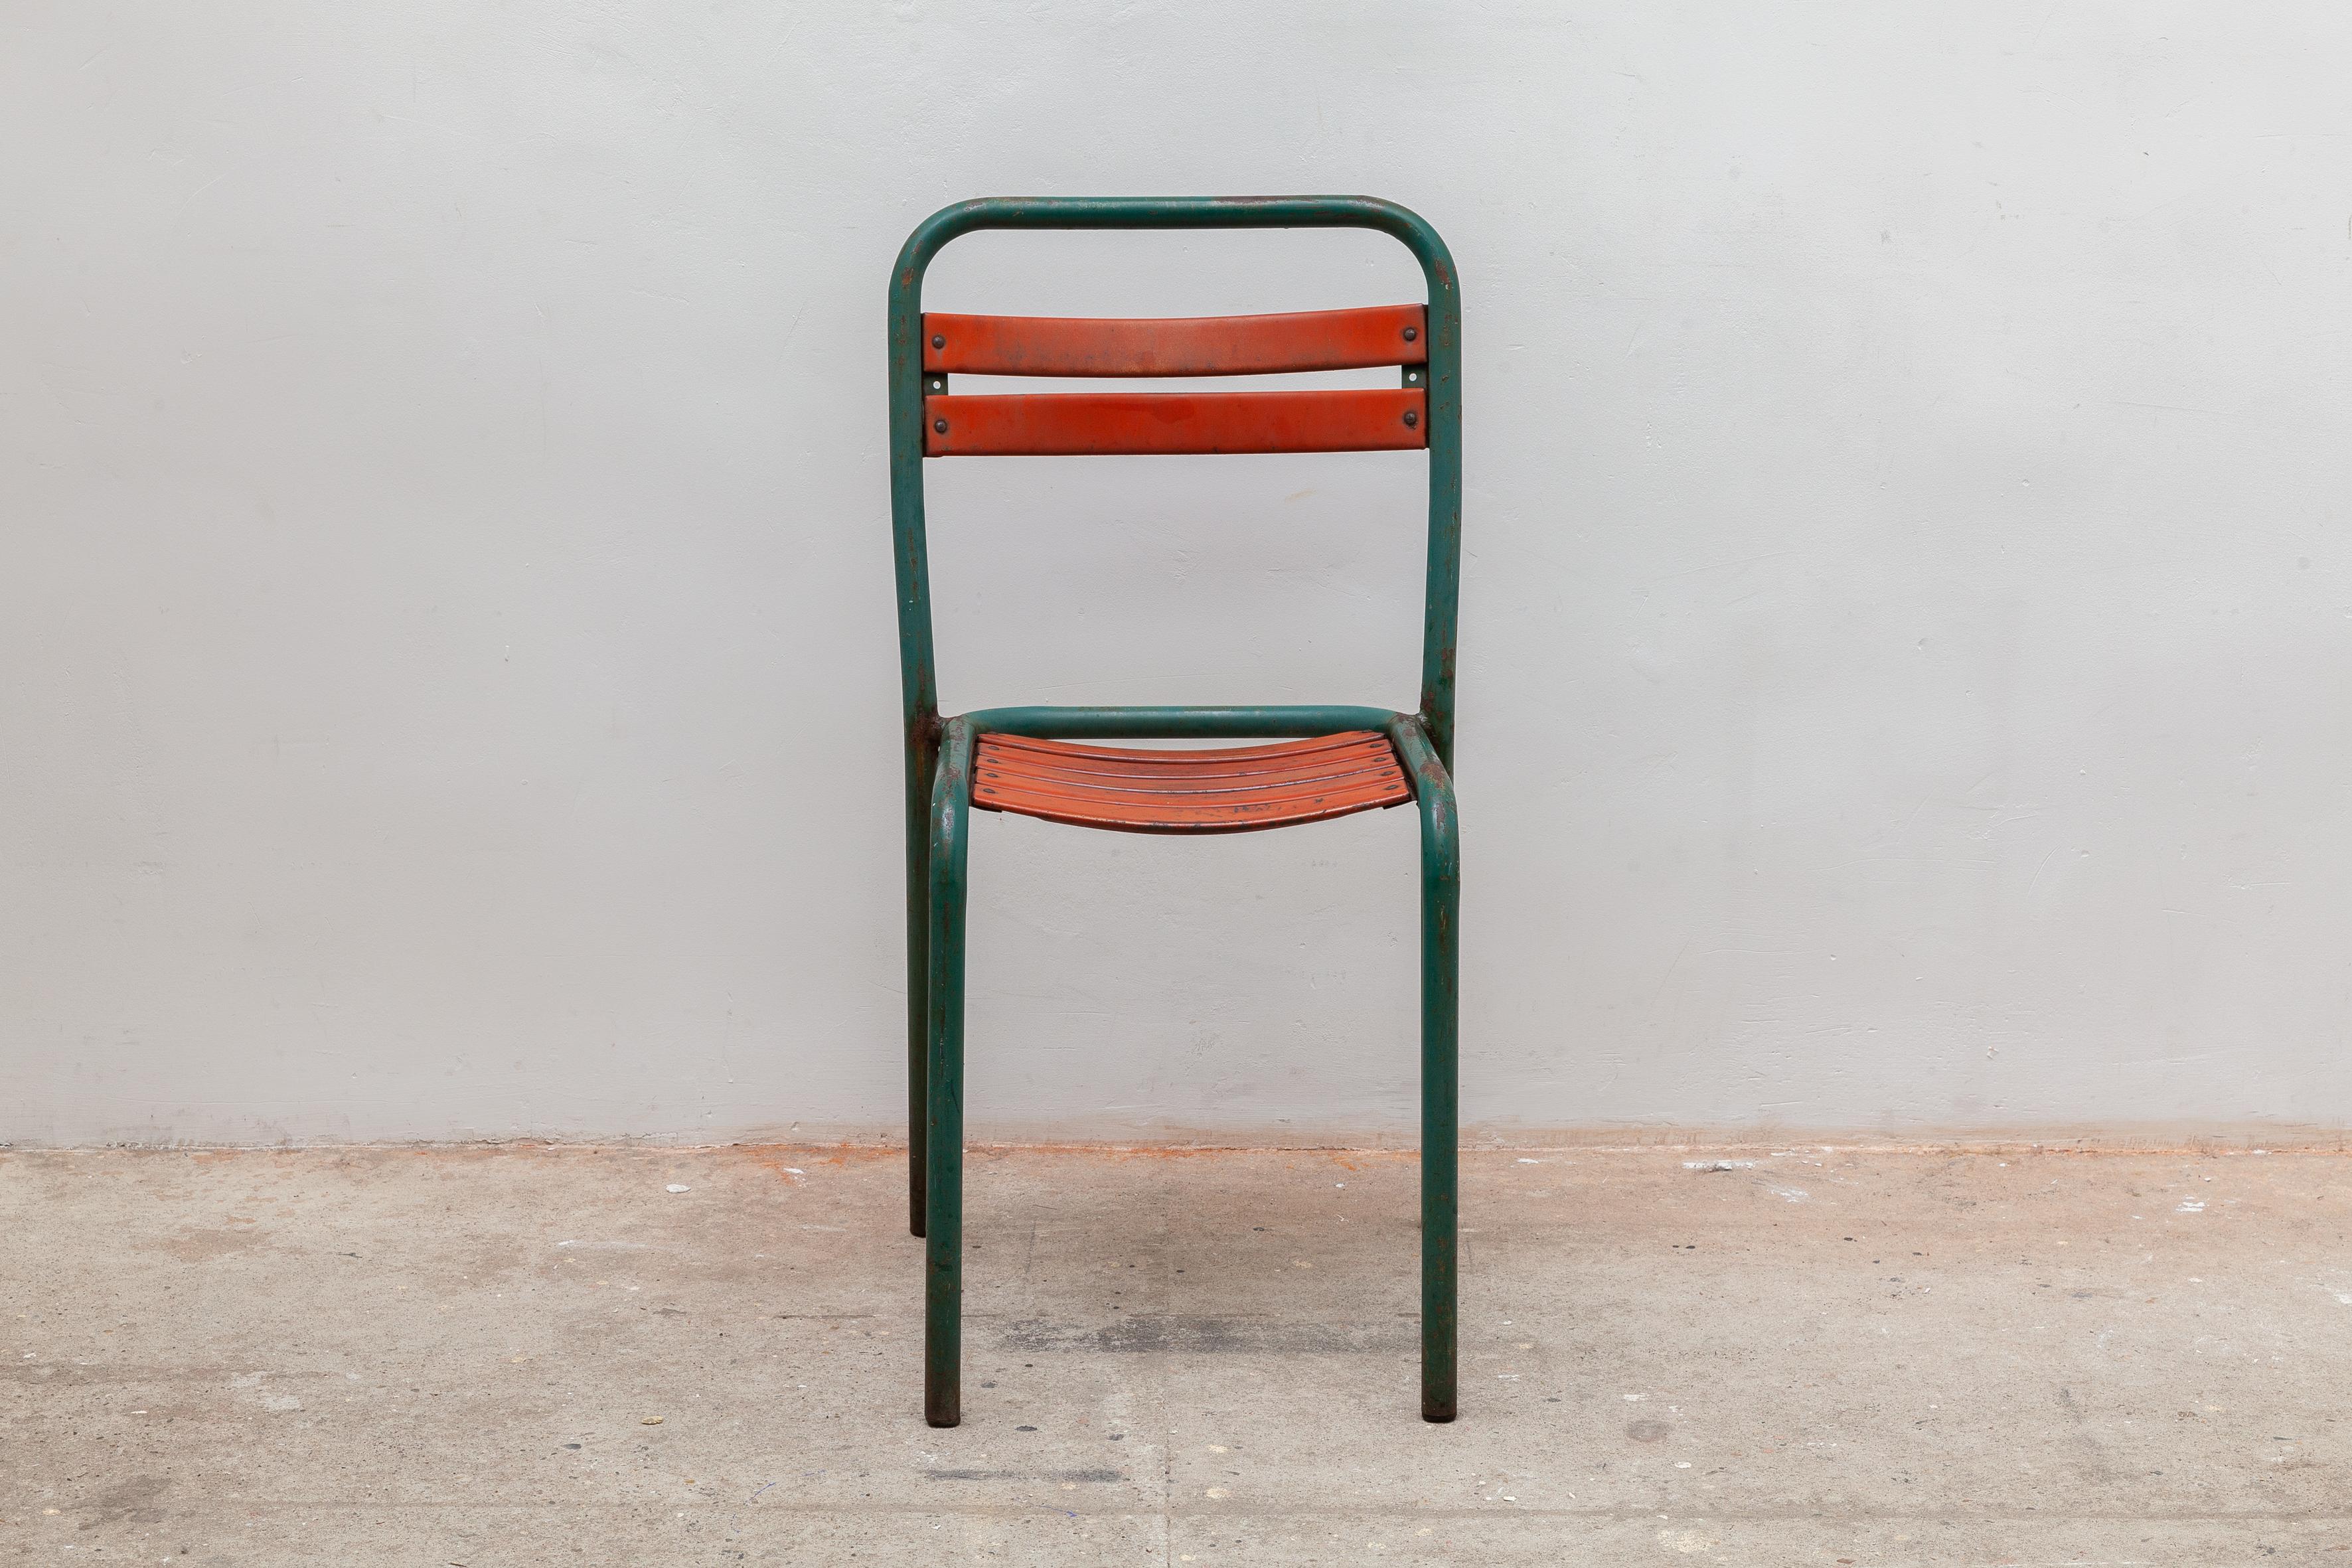 Vintage industrial chairs. Tubular green metal frame with orange slatted seat accents. Great for cafe or outdoor seating. Dimensions: 42W x 80H x 42D cm, Seat: 42 cm high.